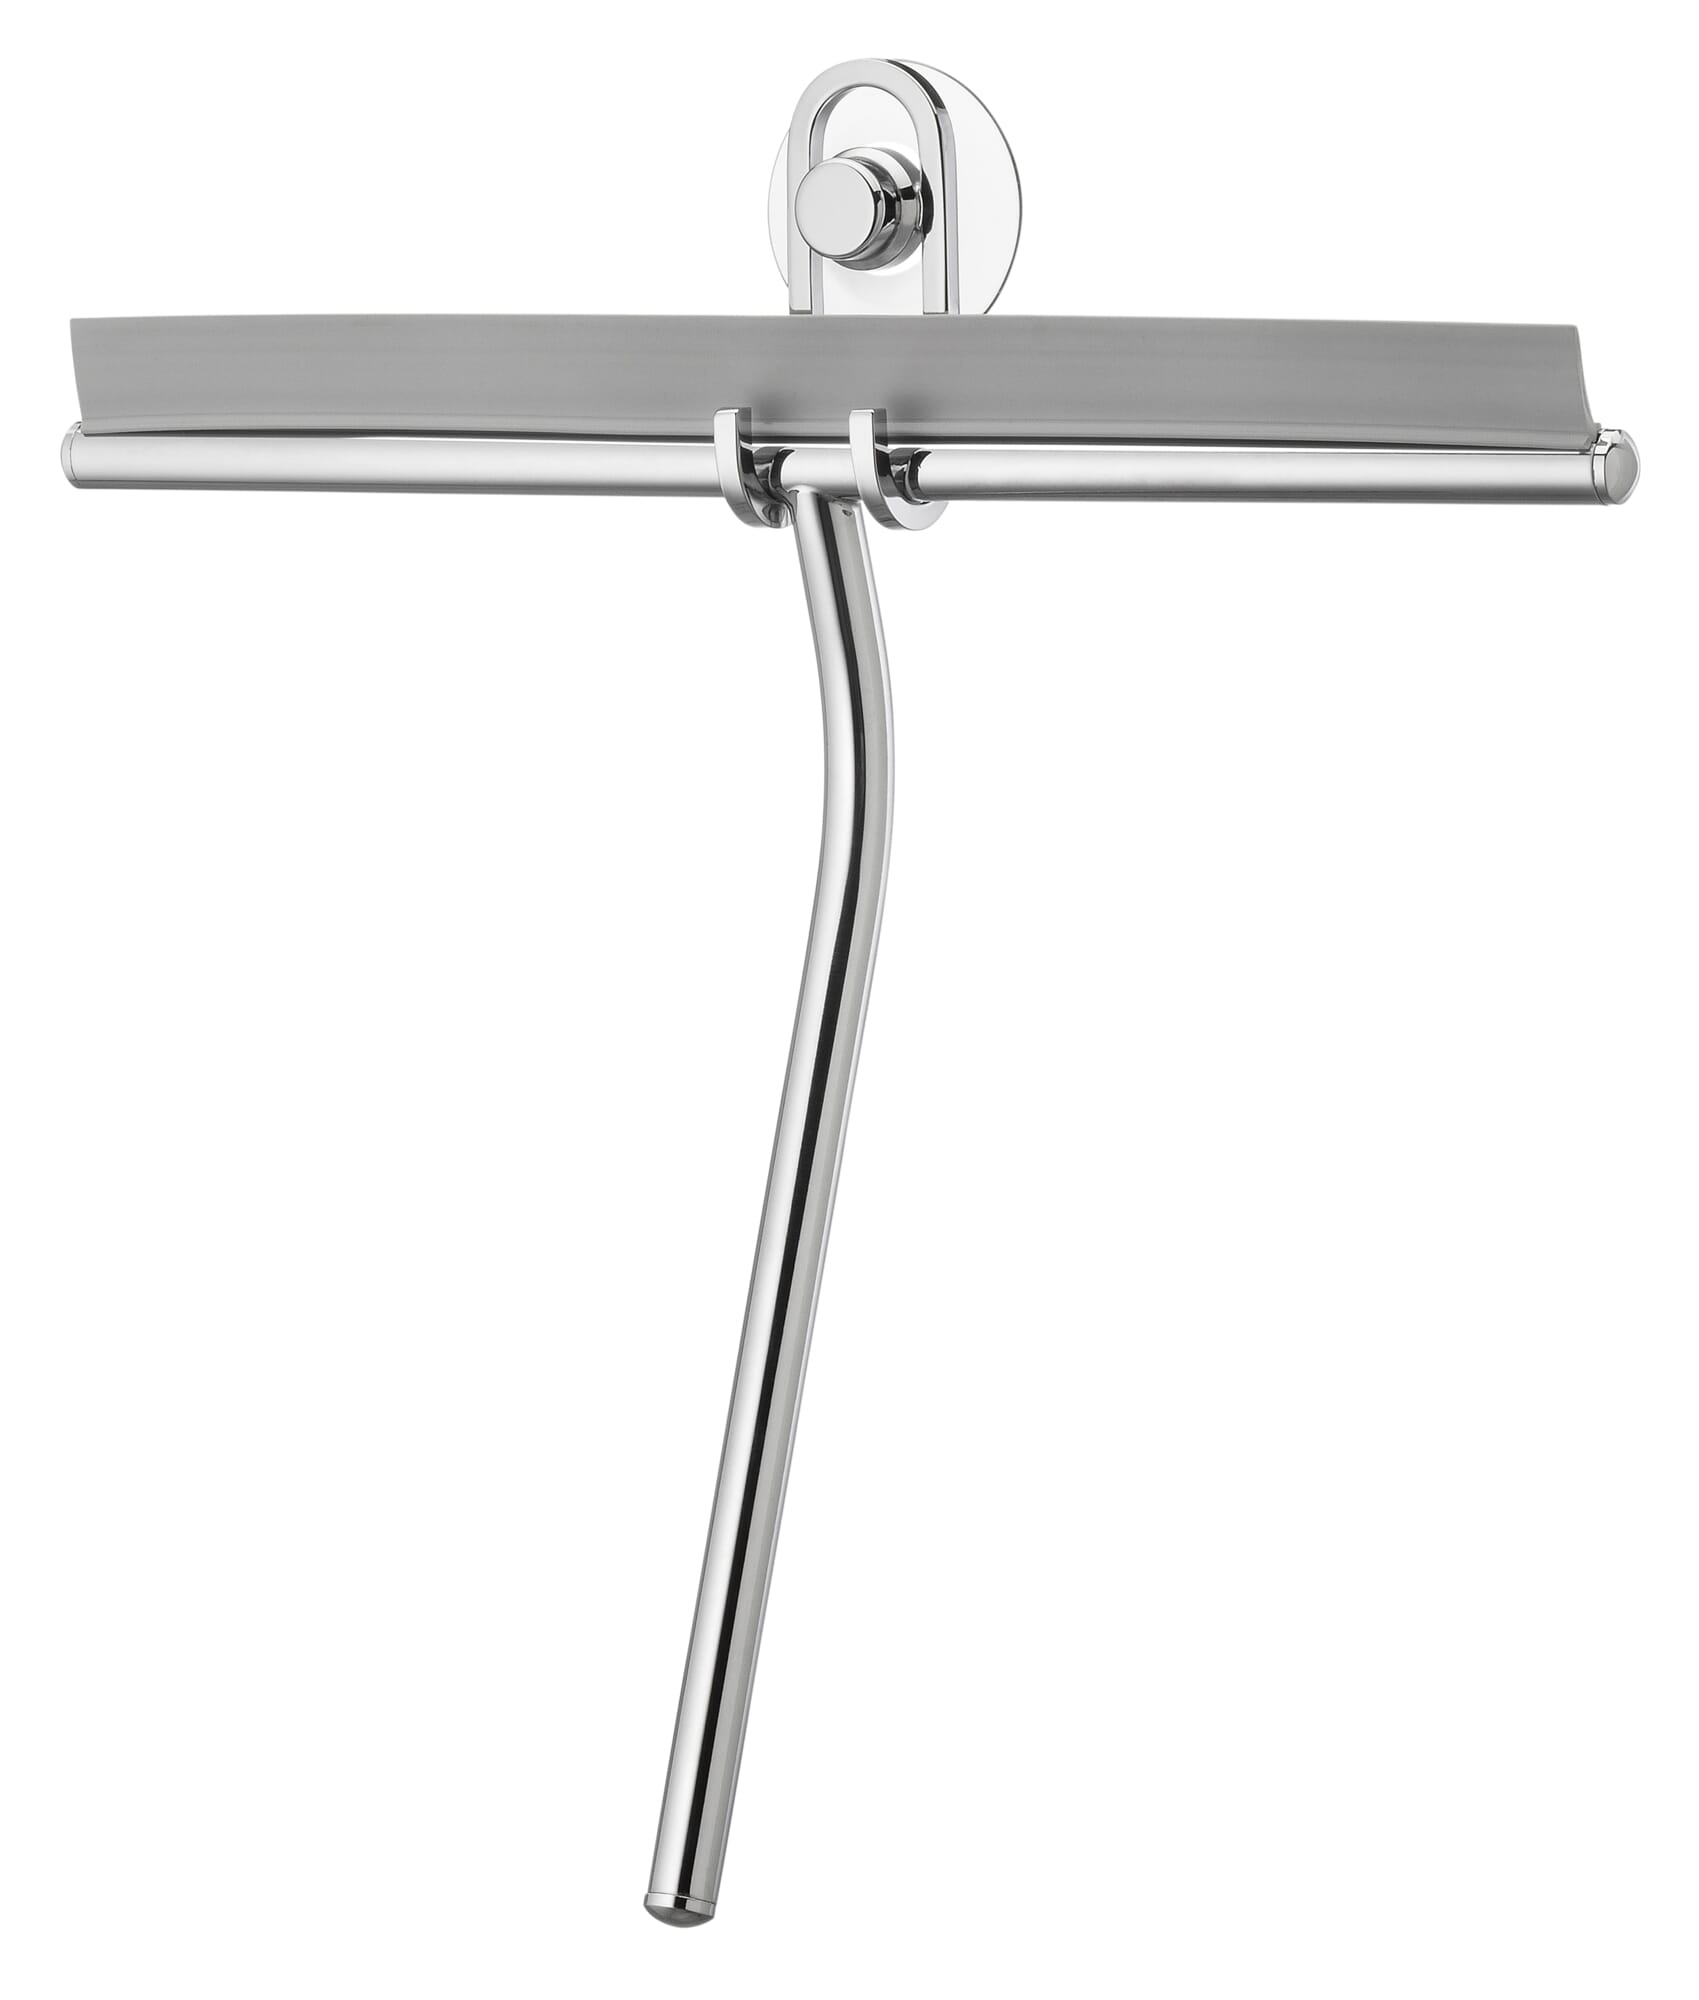 Hook for shower squeegee brass chrome plated